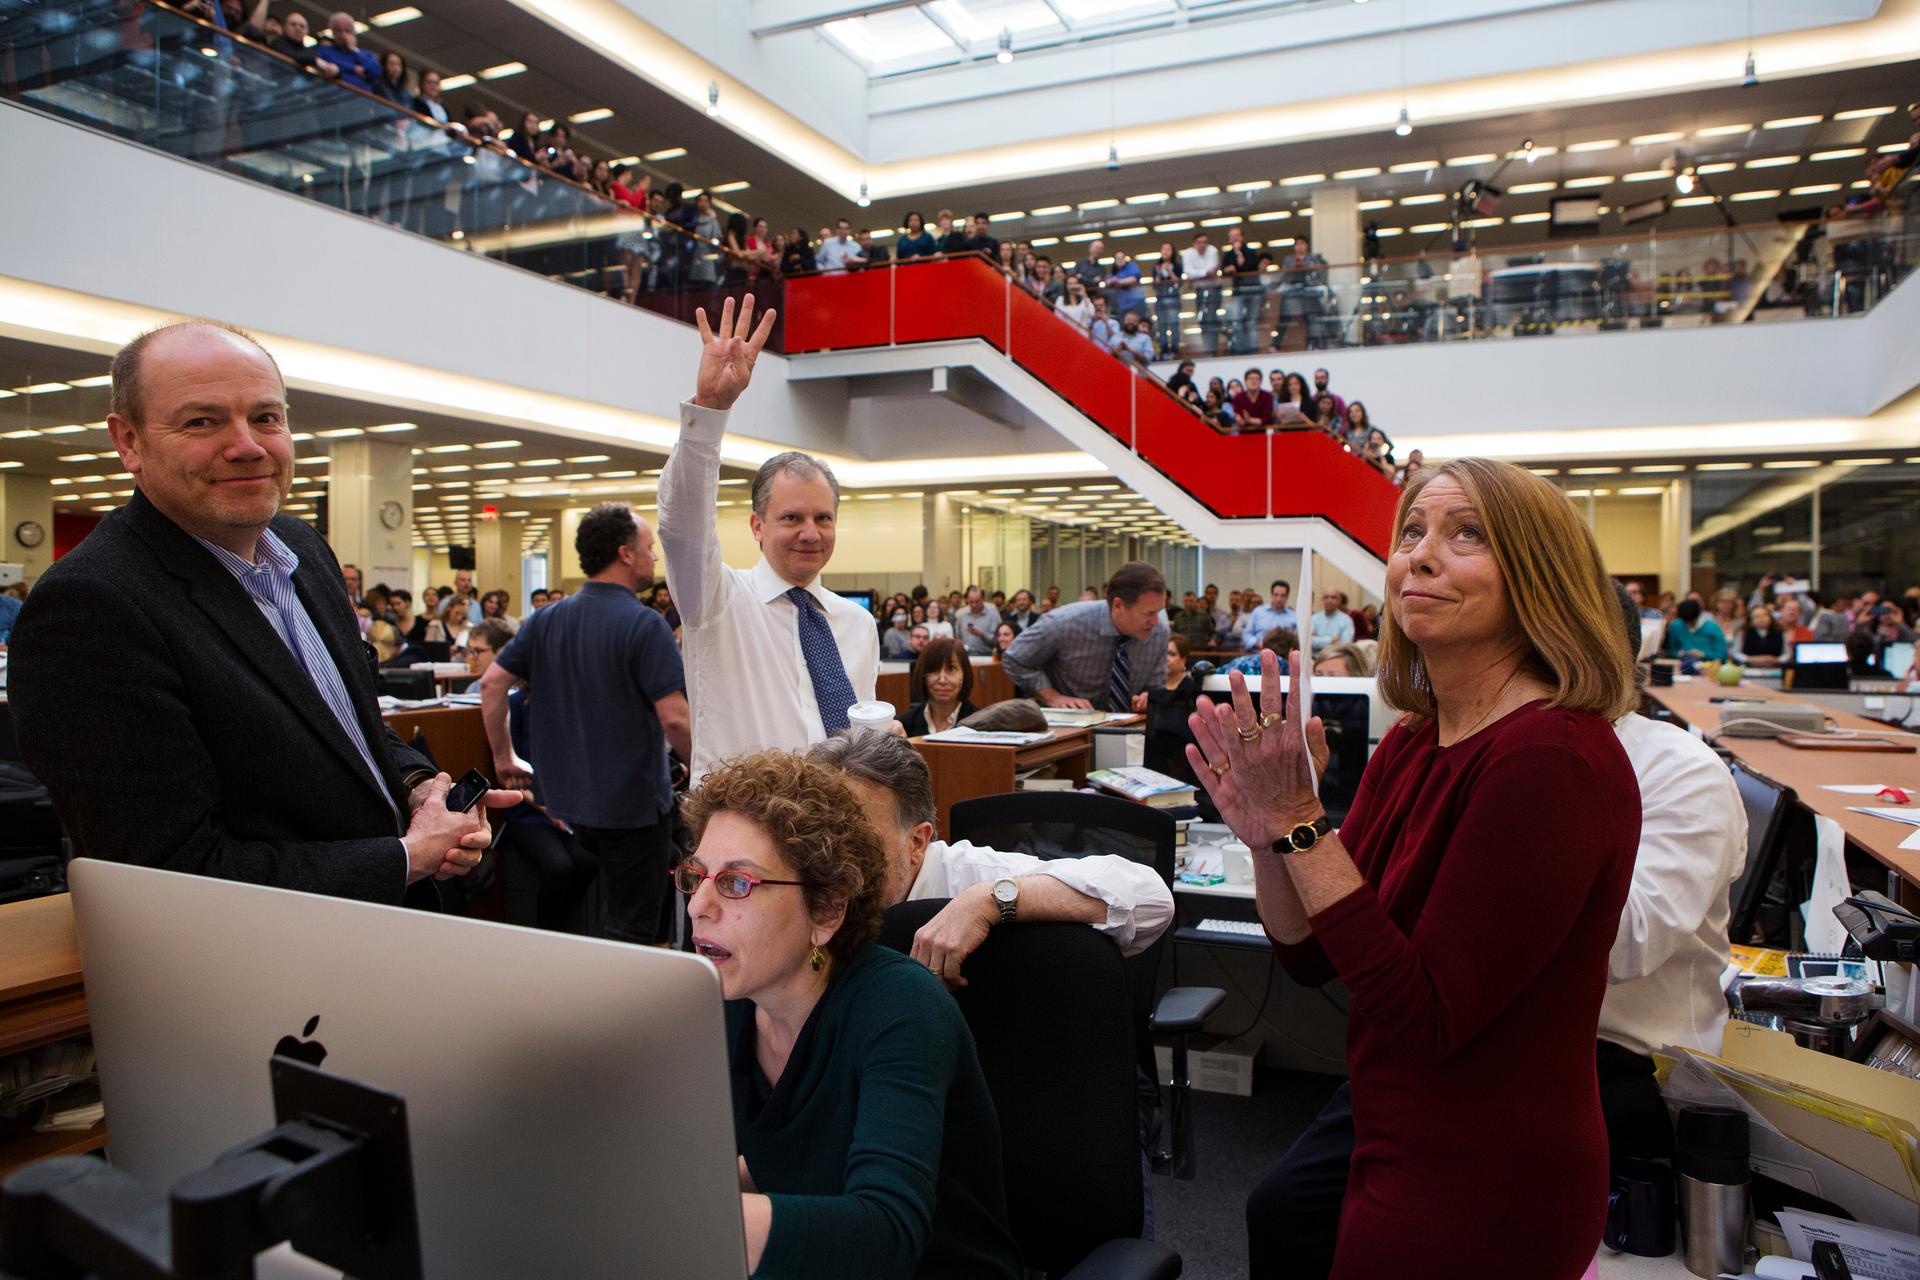 Publisher Arthur Sulzberger Jr. holds up four fingers to indicate the four Pulitzer Prizes won by the New York Times in 2013 as Executive Editor Jill Abramson looks on.  